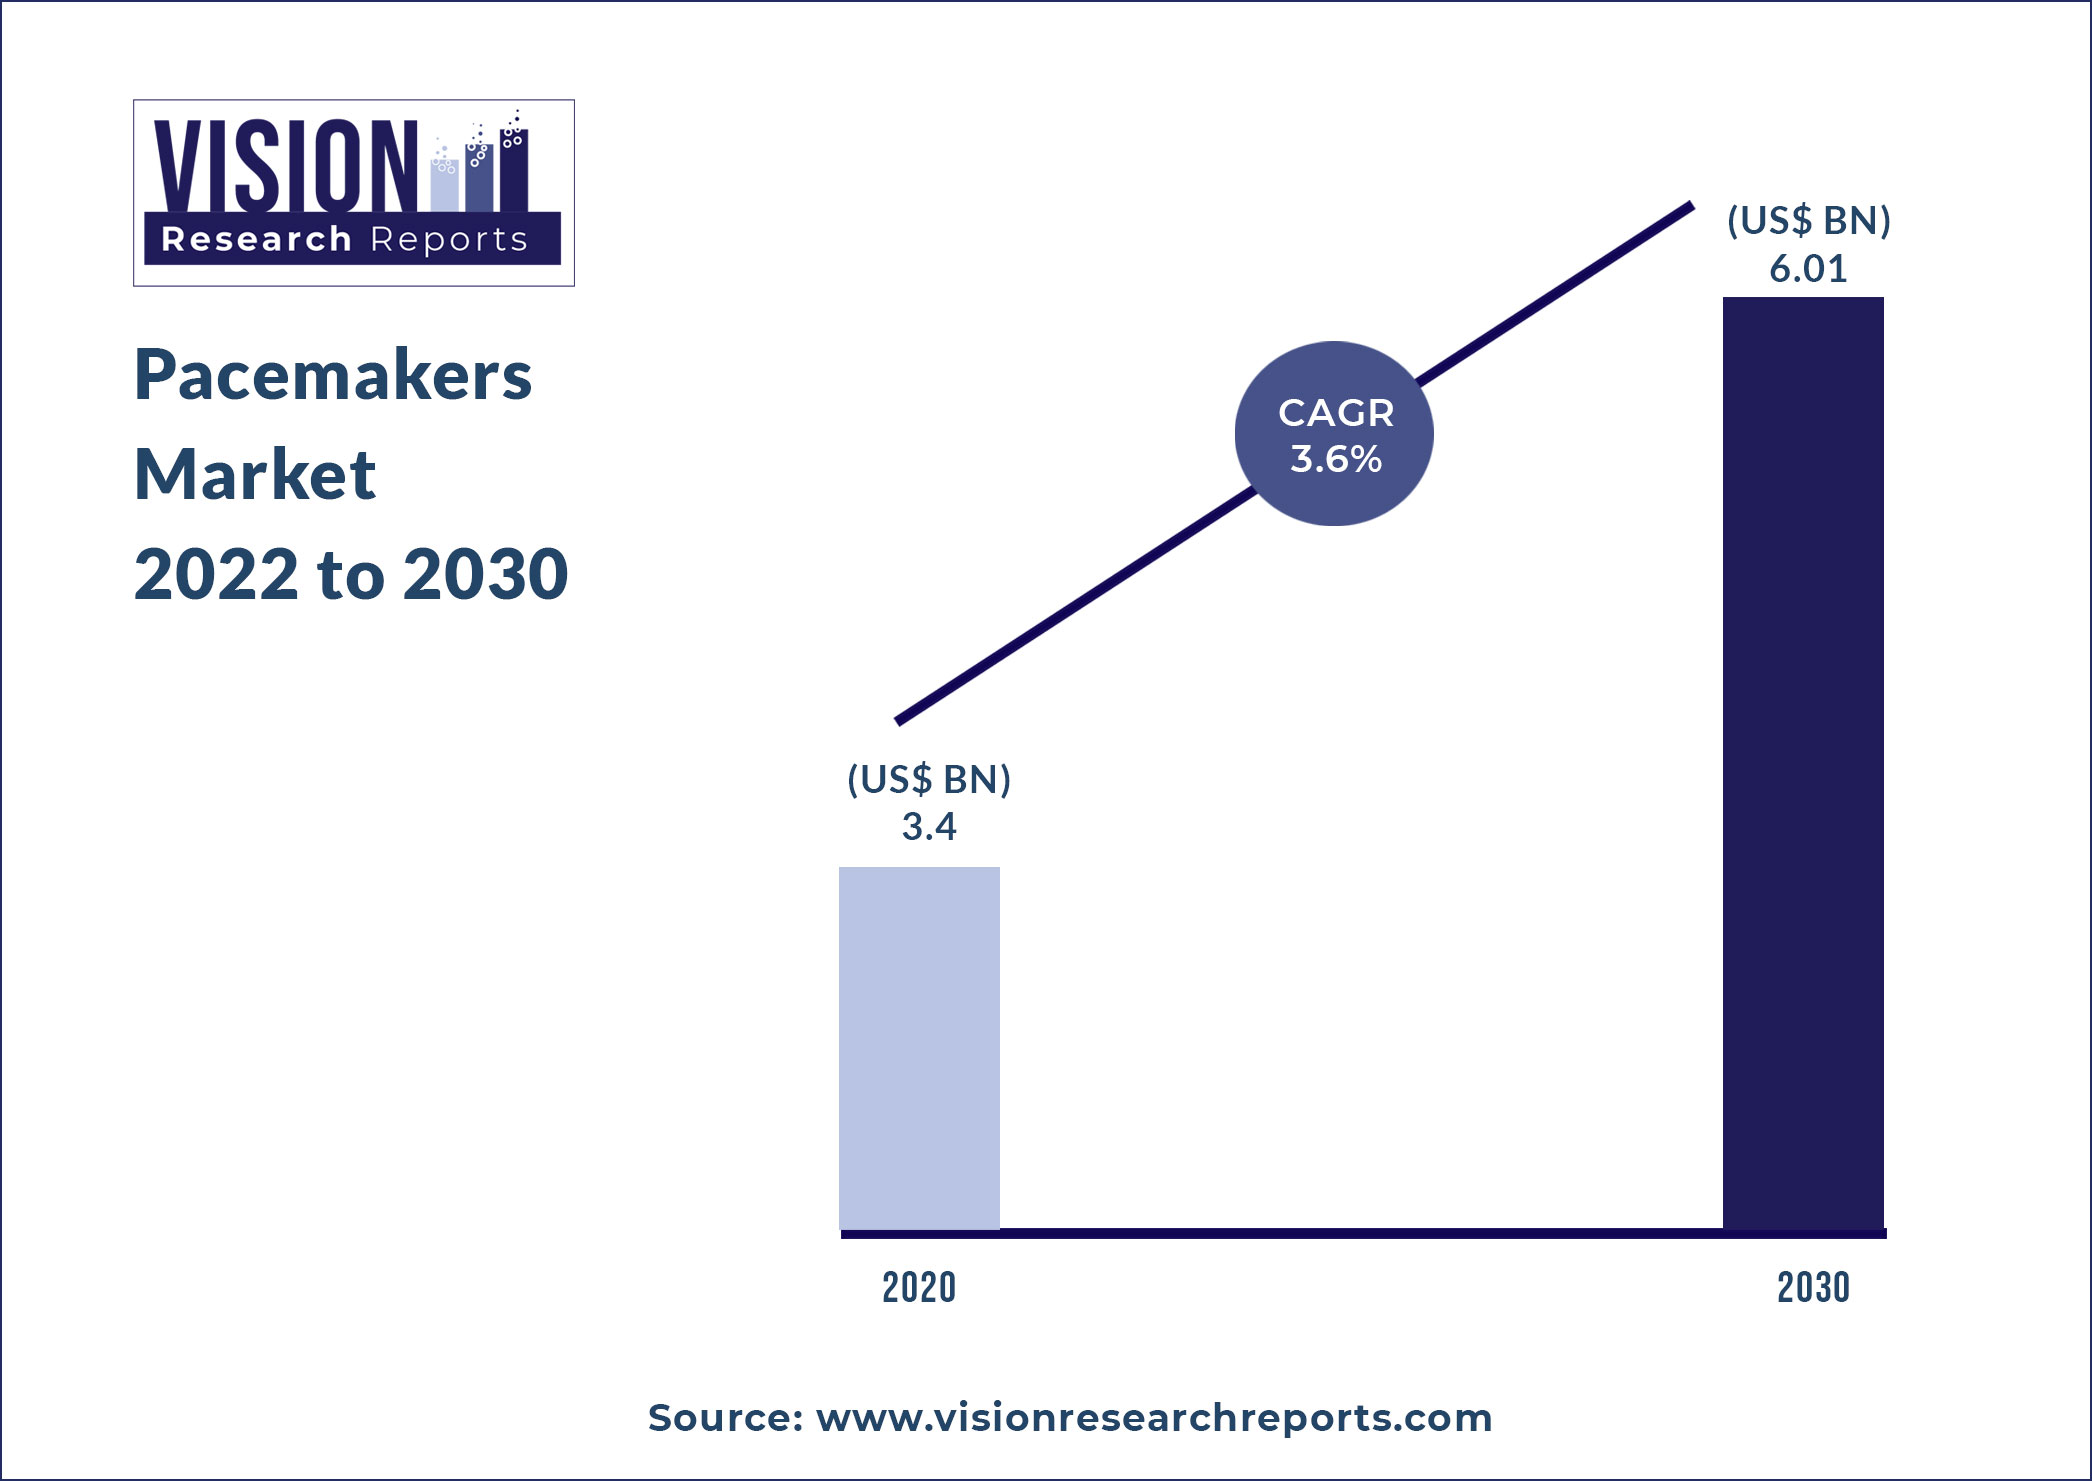 Pacemakers Market Size 2022 to 2030